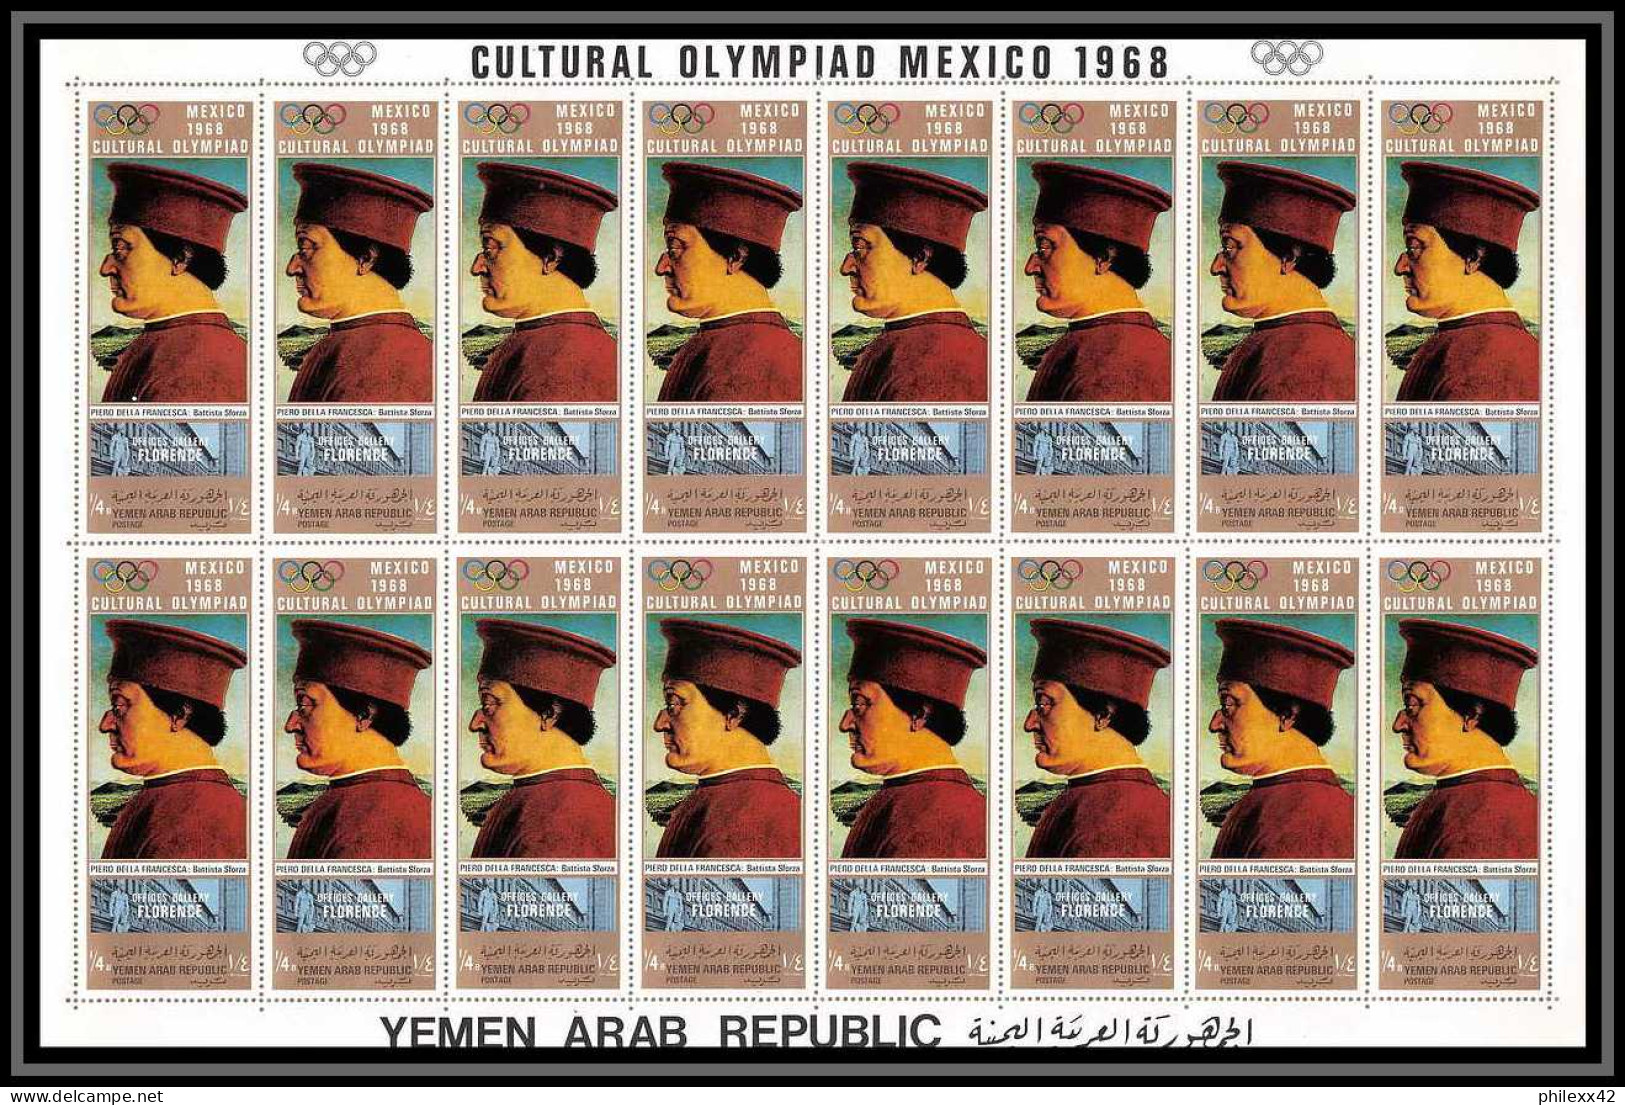 164e - YAR (nord yemen) MNH ** N° 876 / 881 A gold jeux olympiques (olympic games) feuilles (sheets) feuilles (sheets)